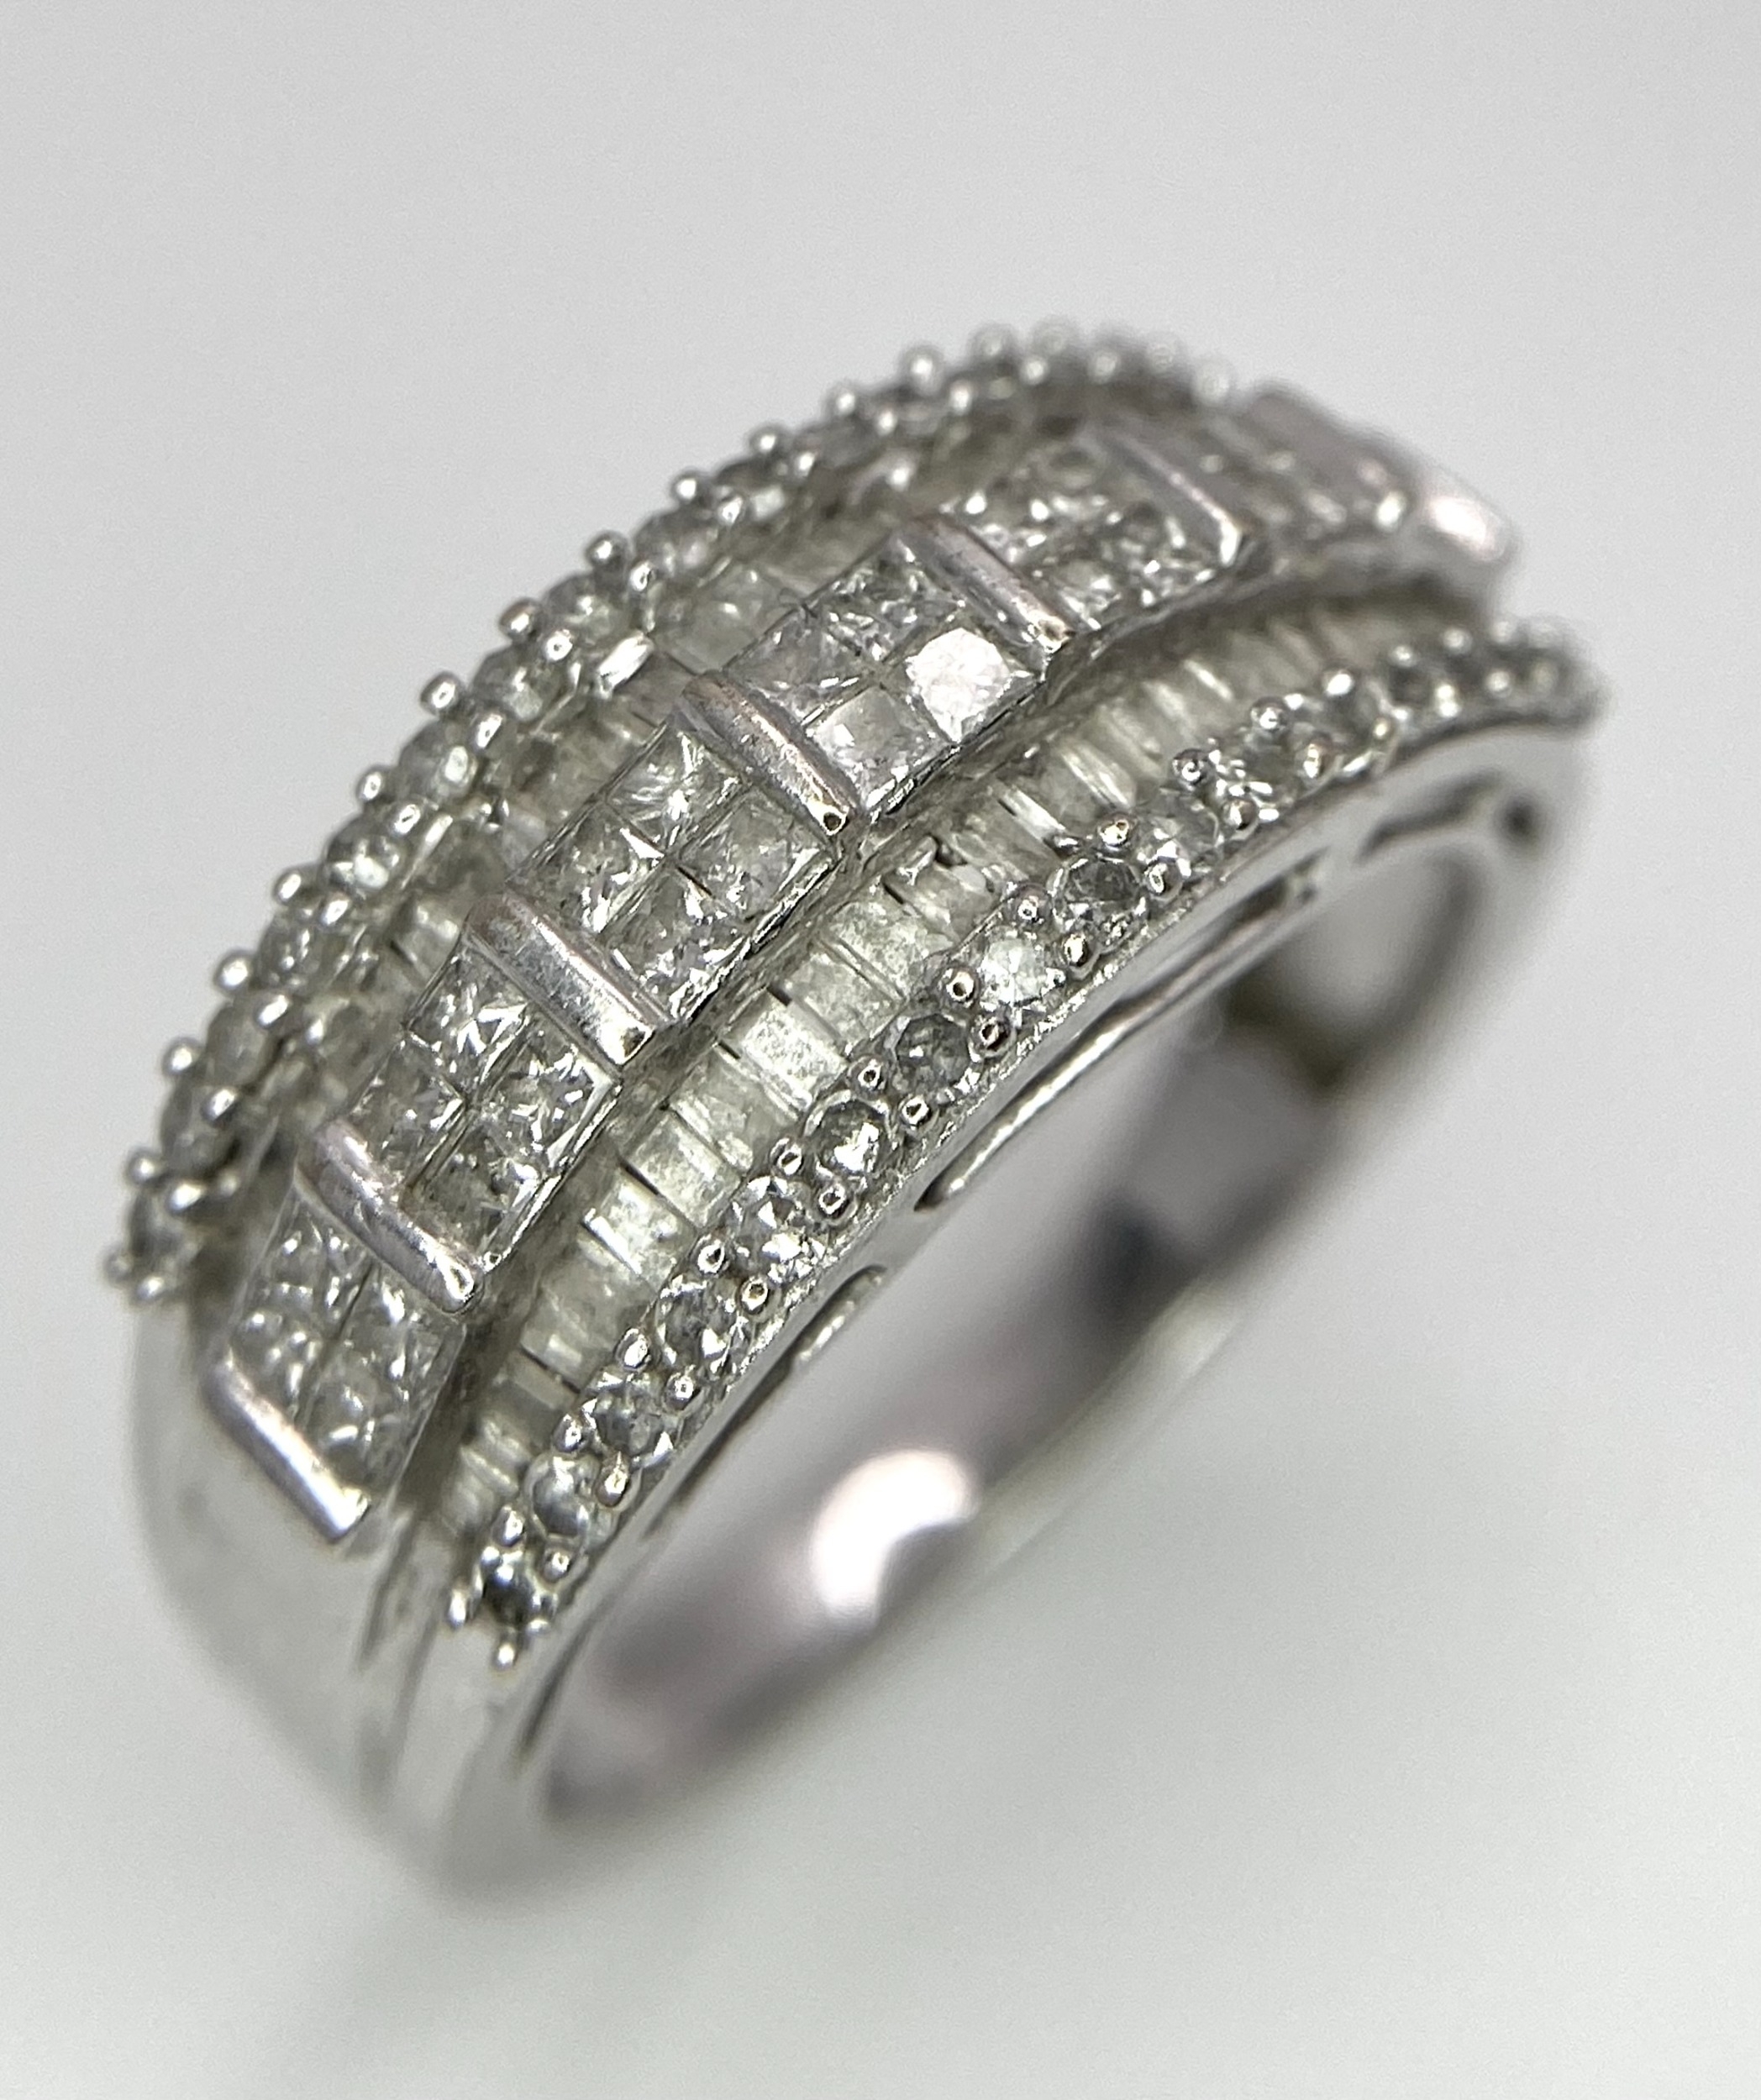 A 9K White Gold Mixed Cut Diamond Ring. Five rows of, square, round and baguette cut diamonds. - Image 2 of 7